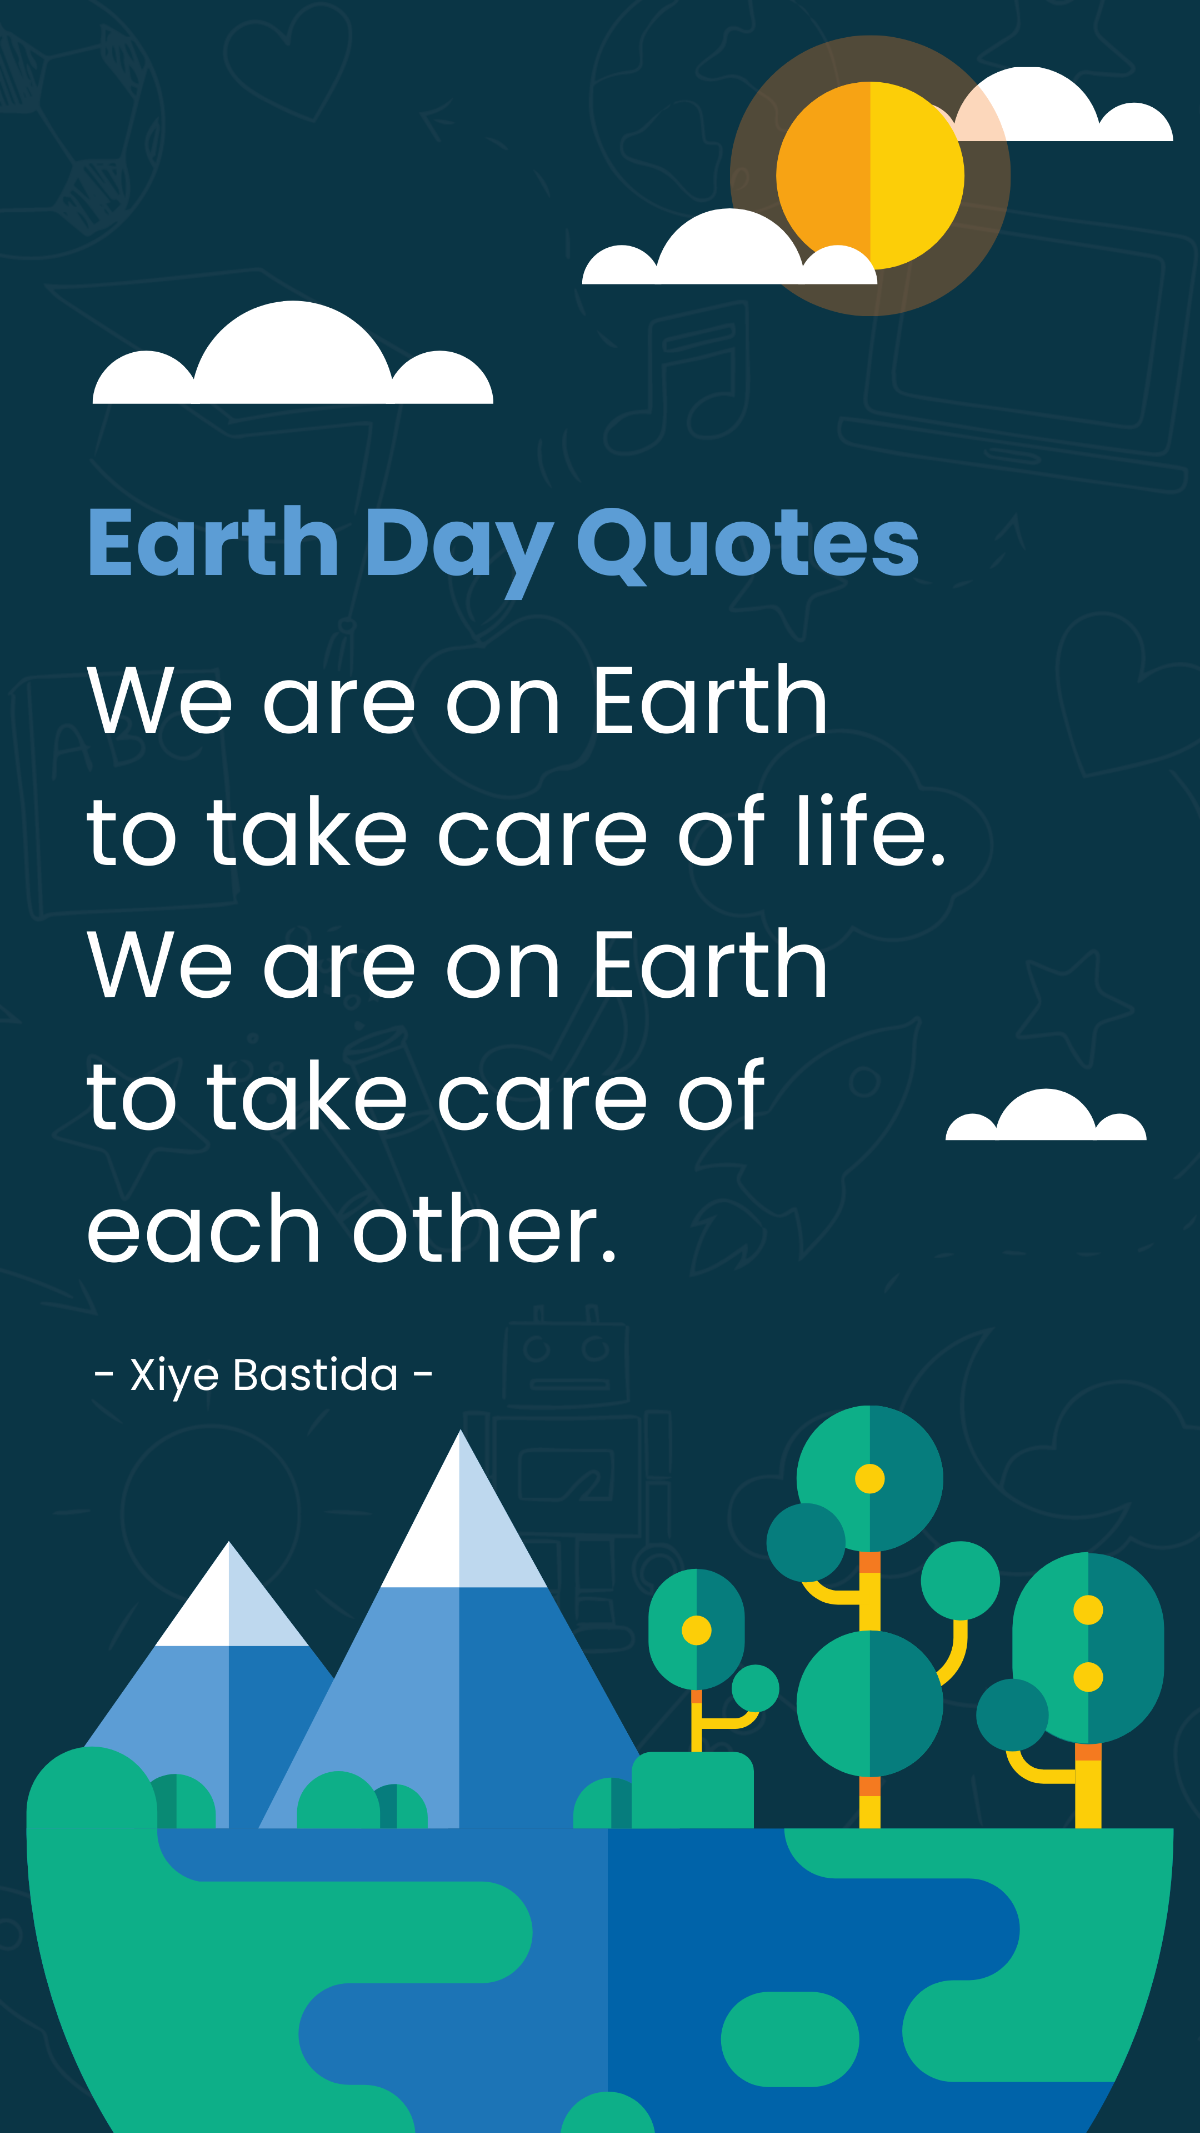 Earth Day Quotes for Students